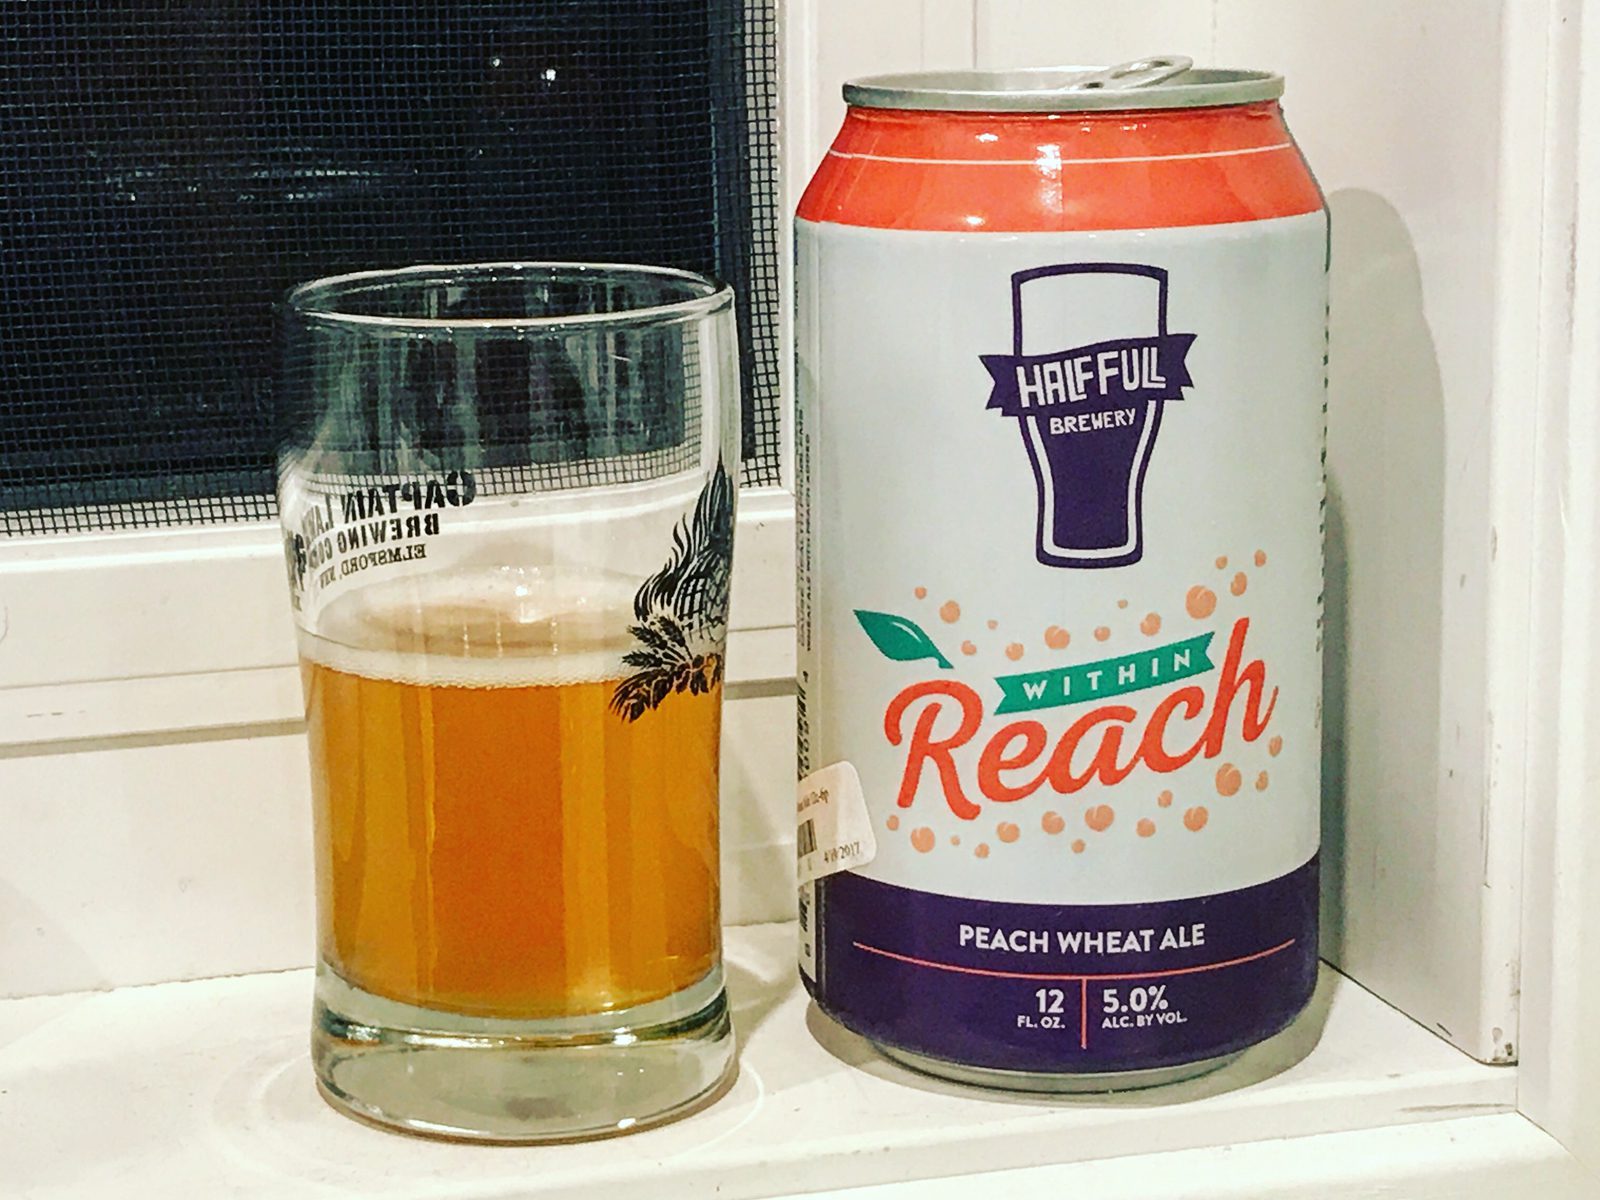 Half Full Brewery: Within Reach